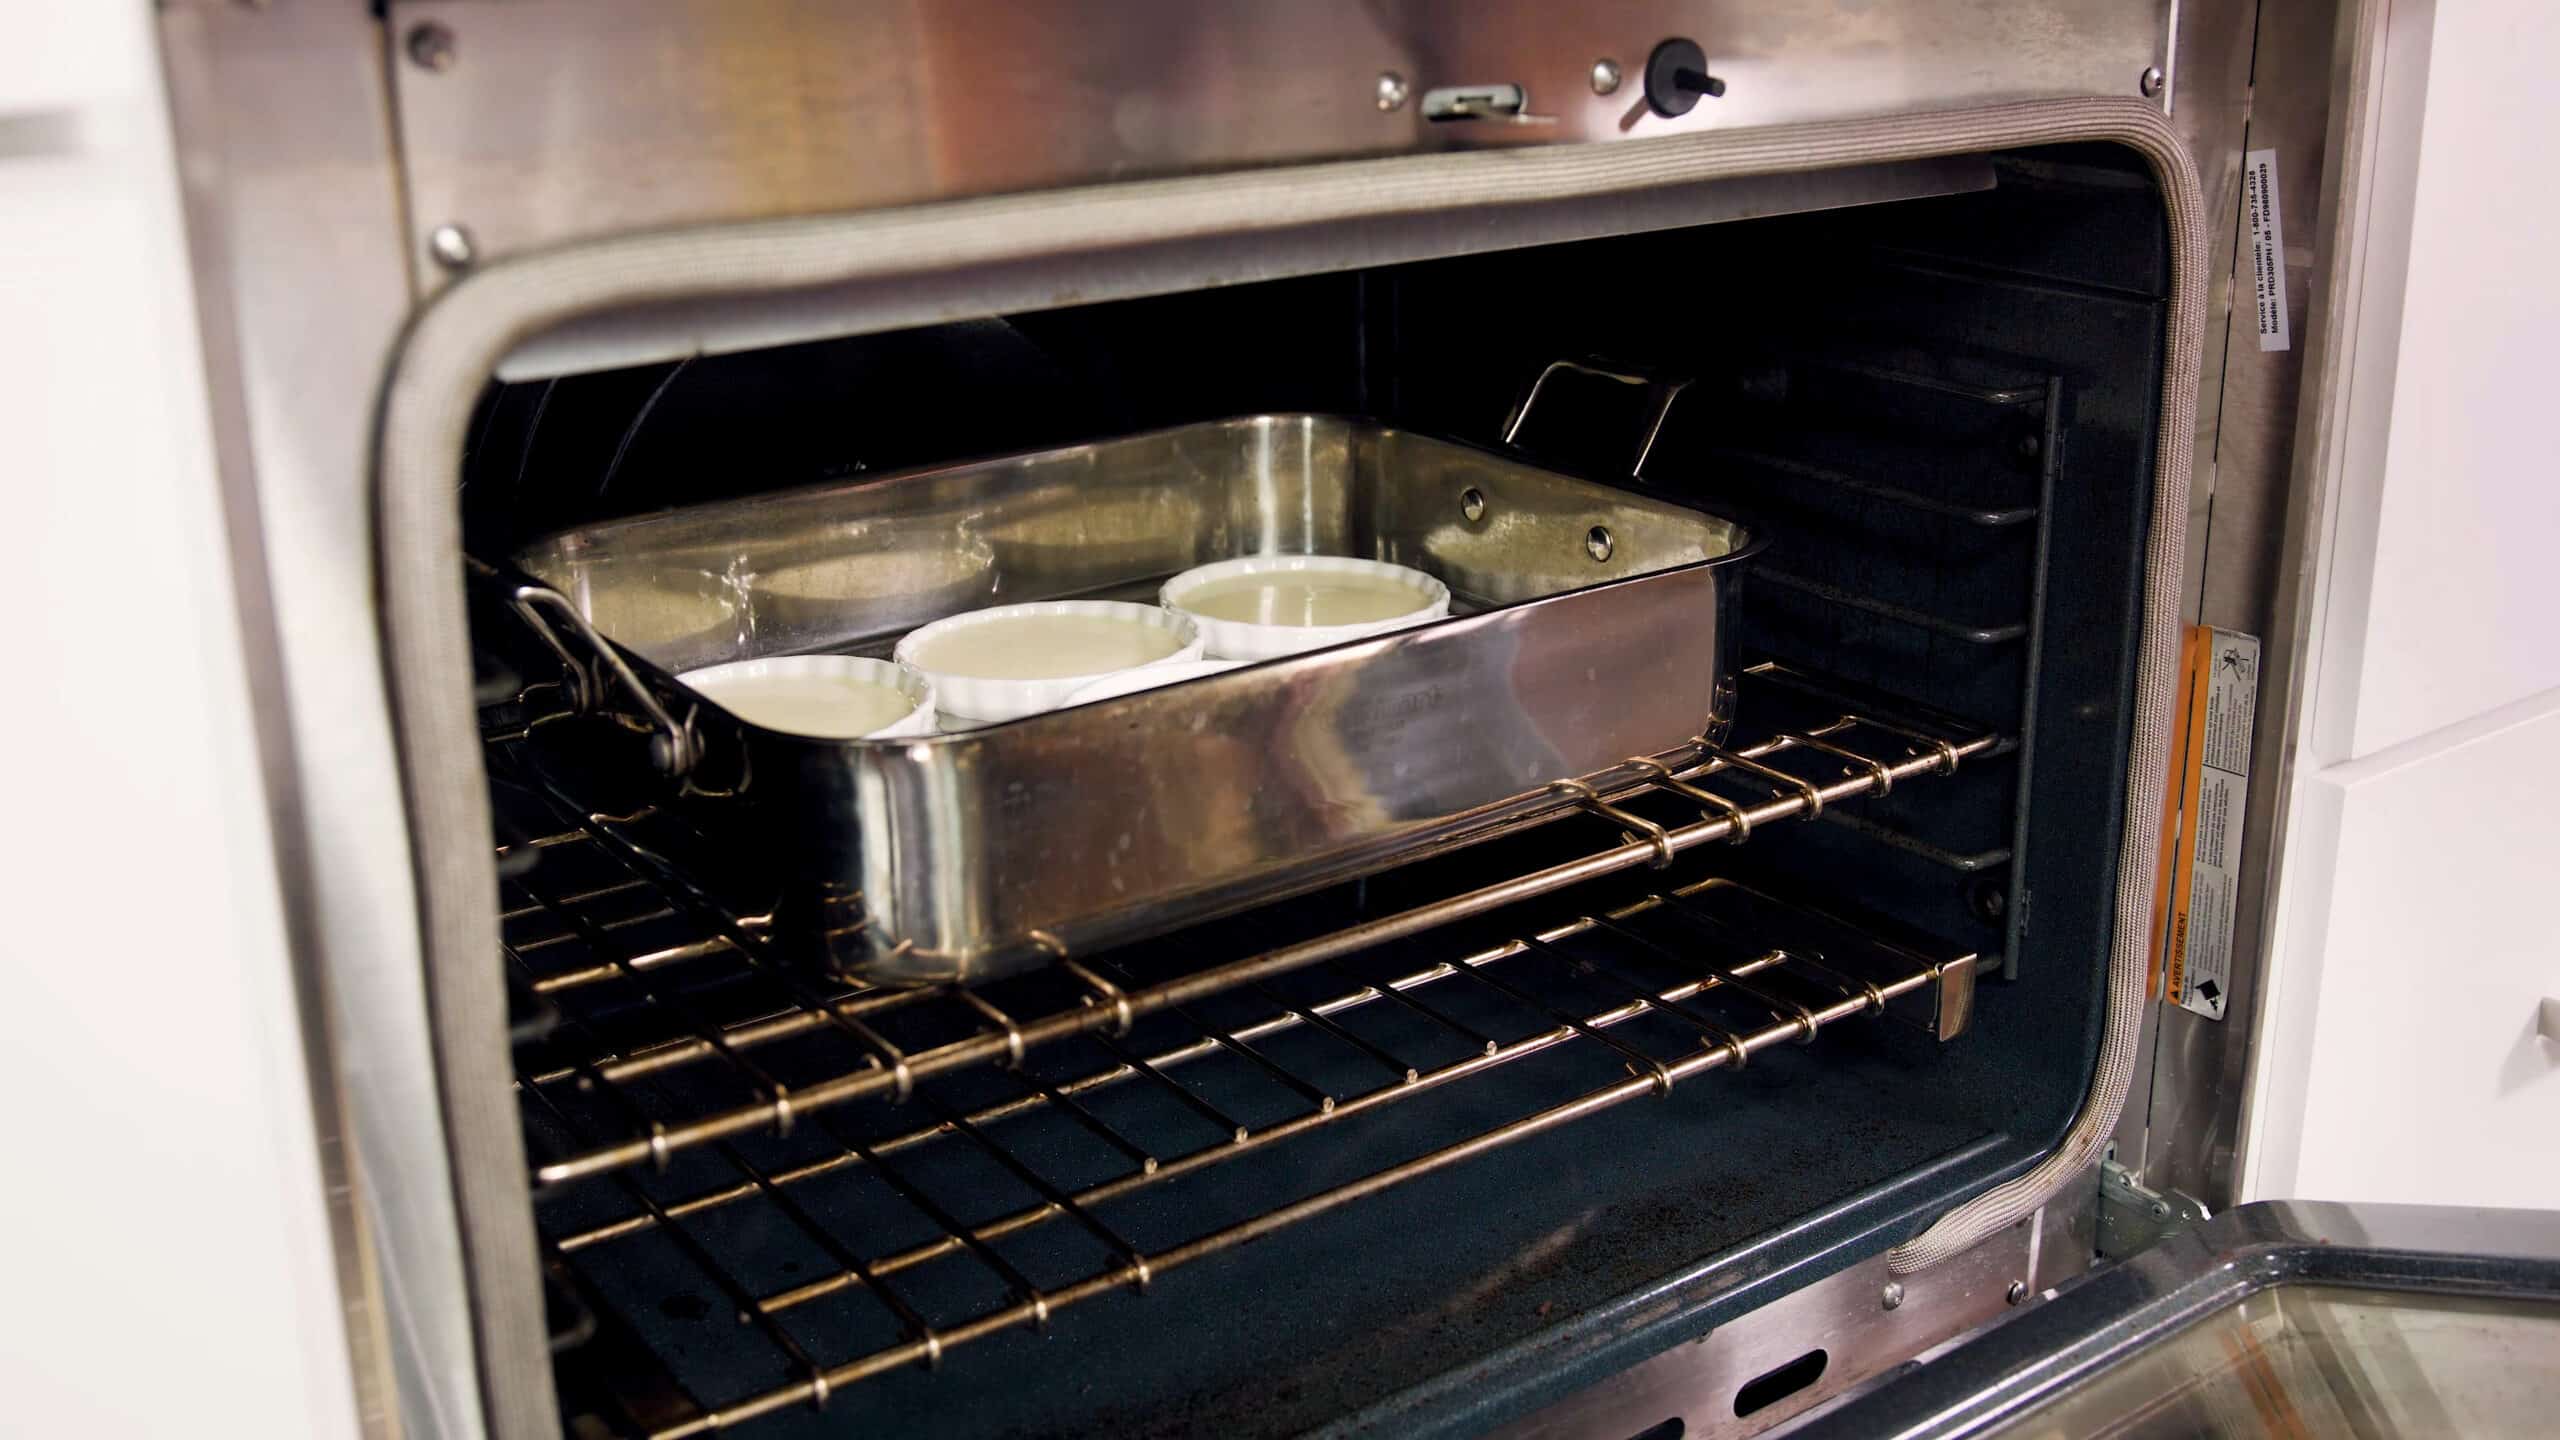 Angled view of open oven with a large metal hotel pan filled with six white glass ramekins filled with strained egg mixture floating in a water bath all placed on the metal rack in the middle of the oven.